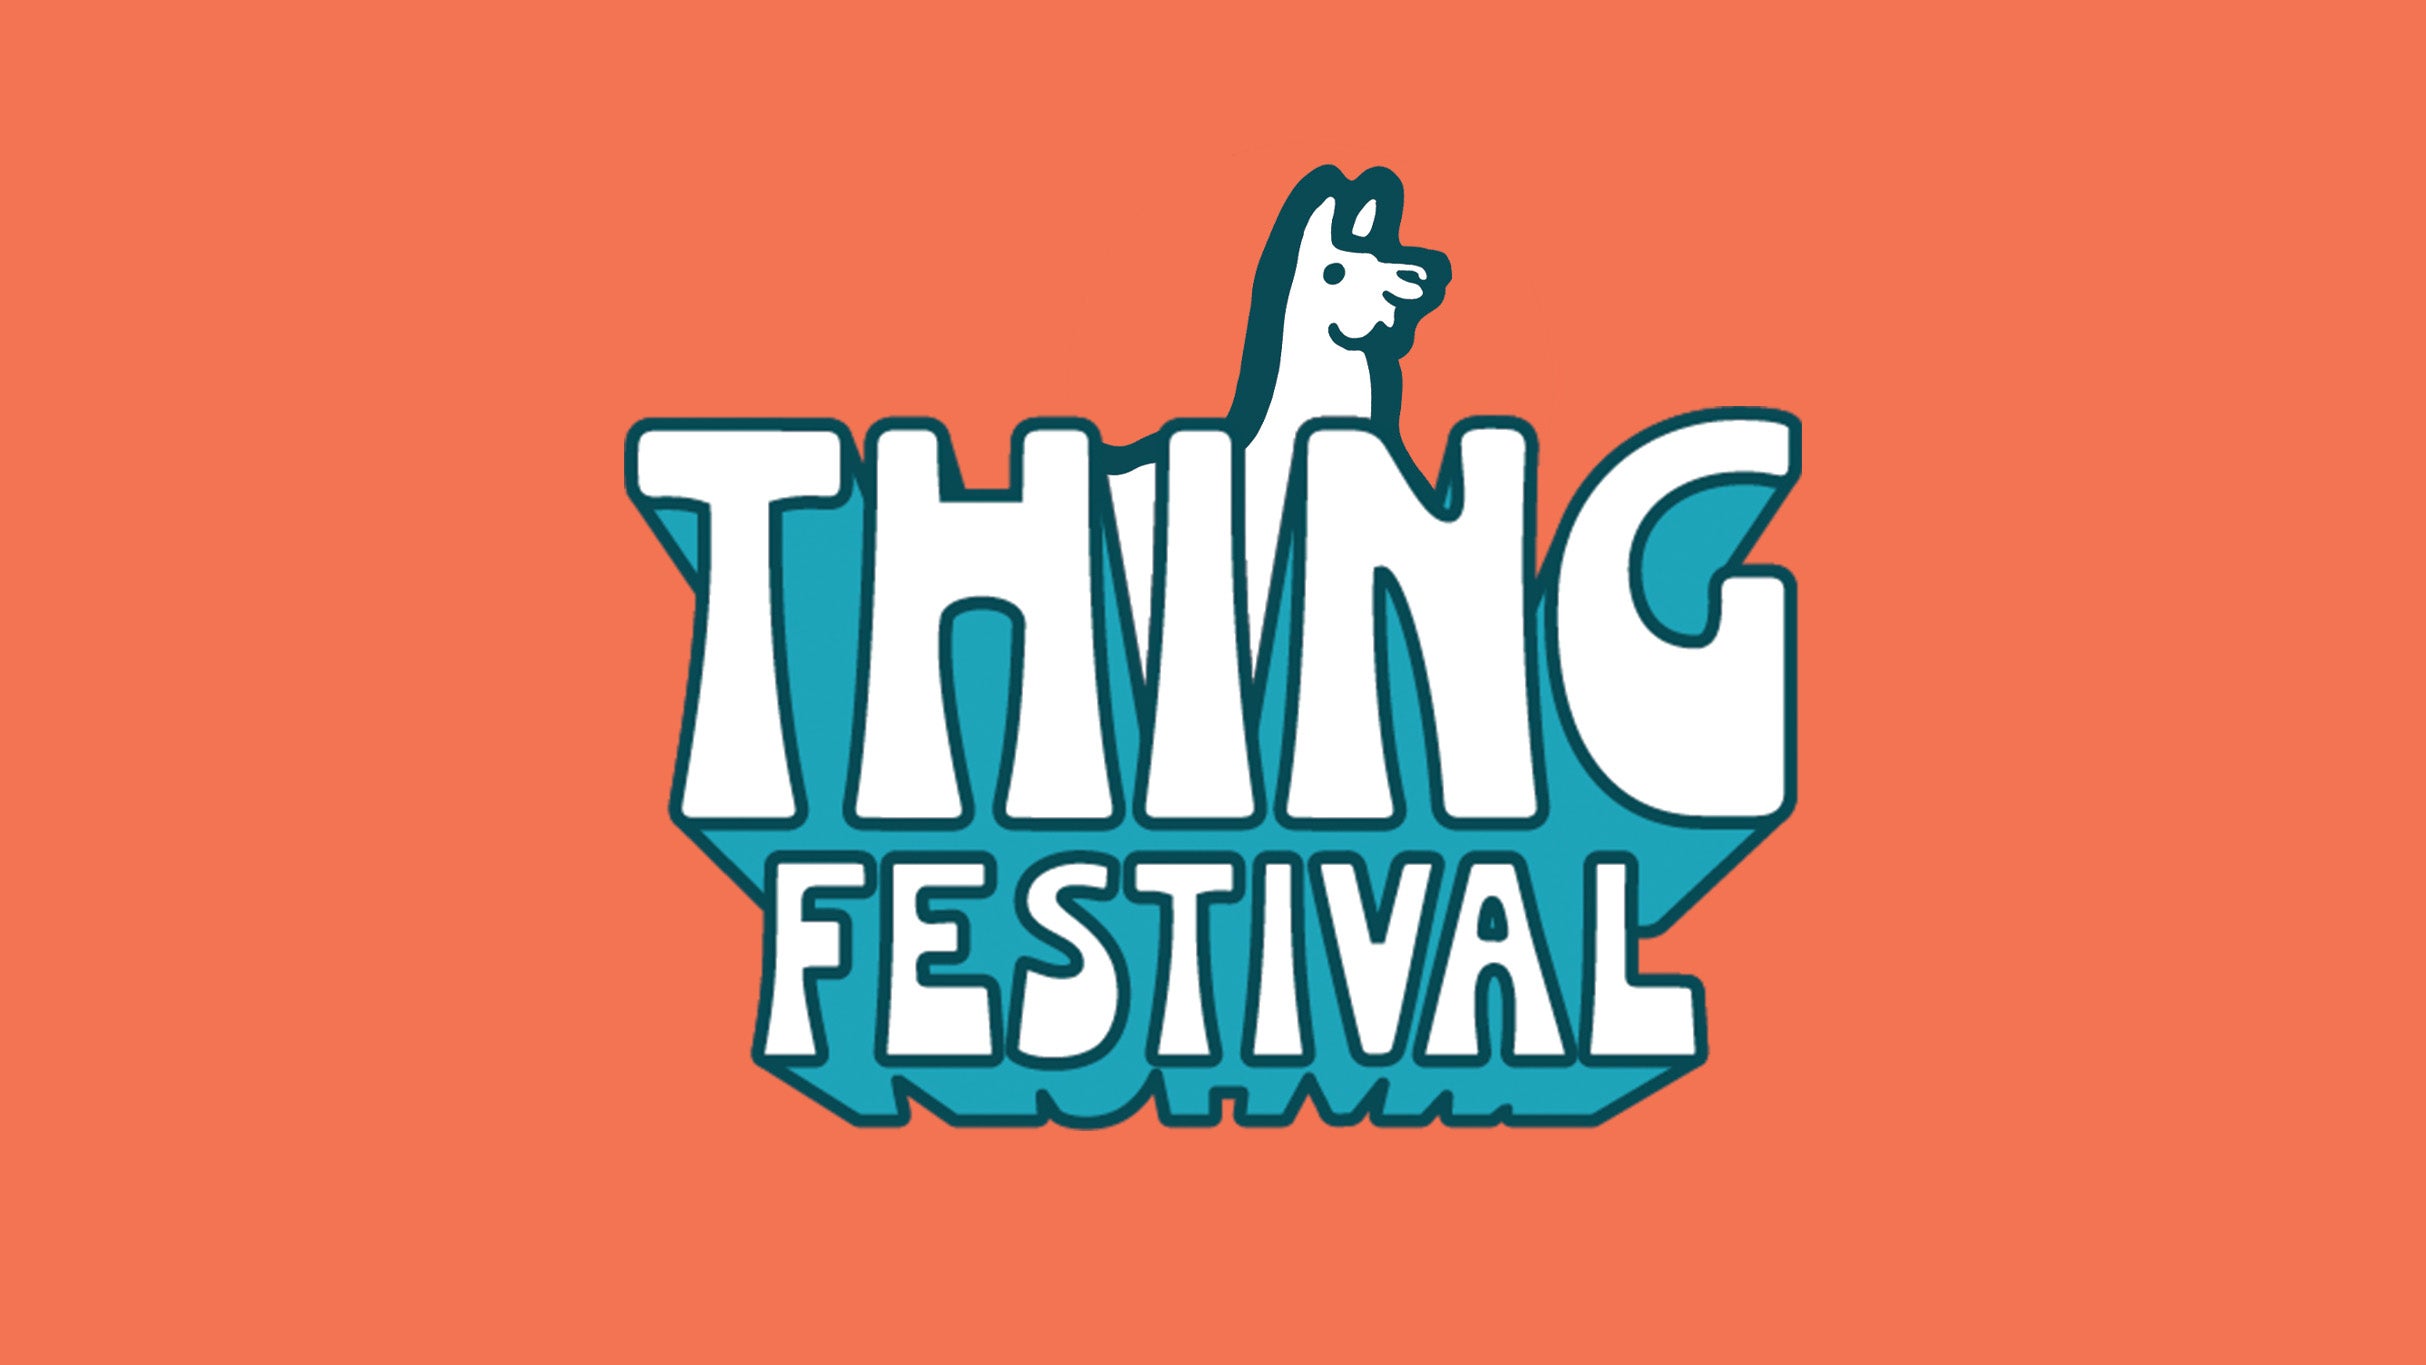 THING Festival at Remlinger Farms